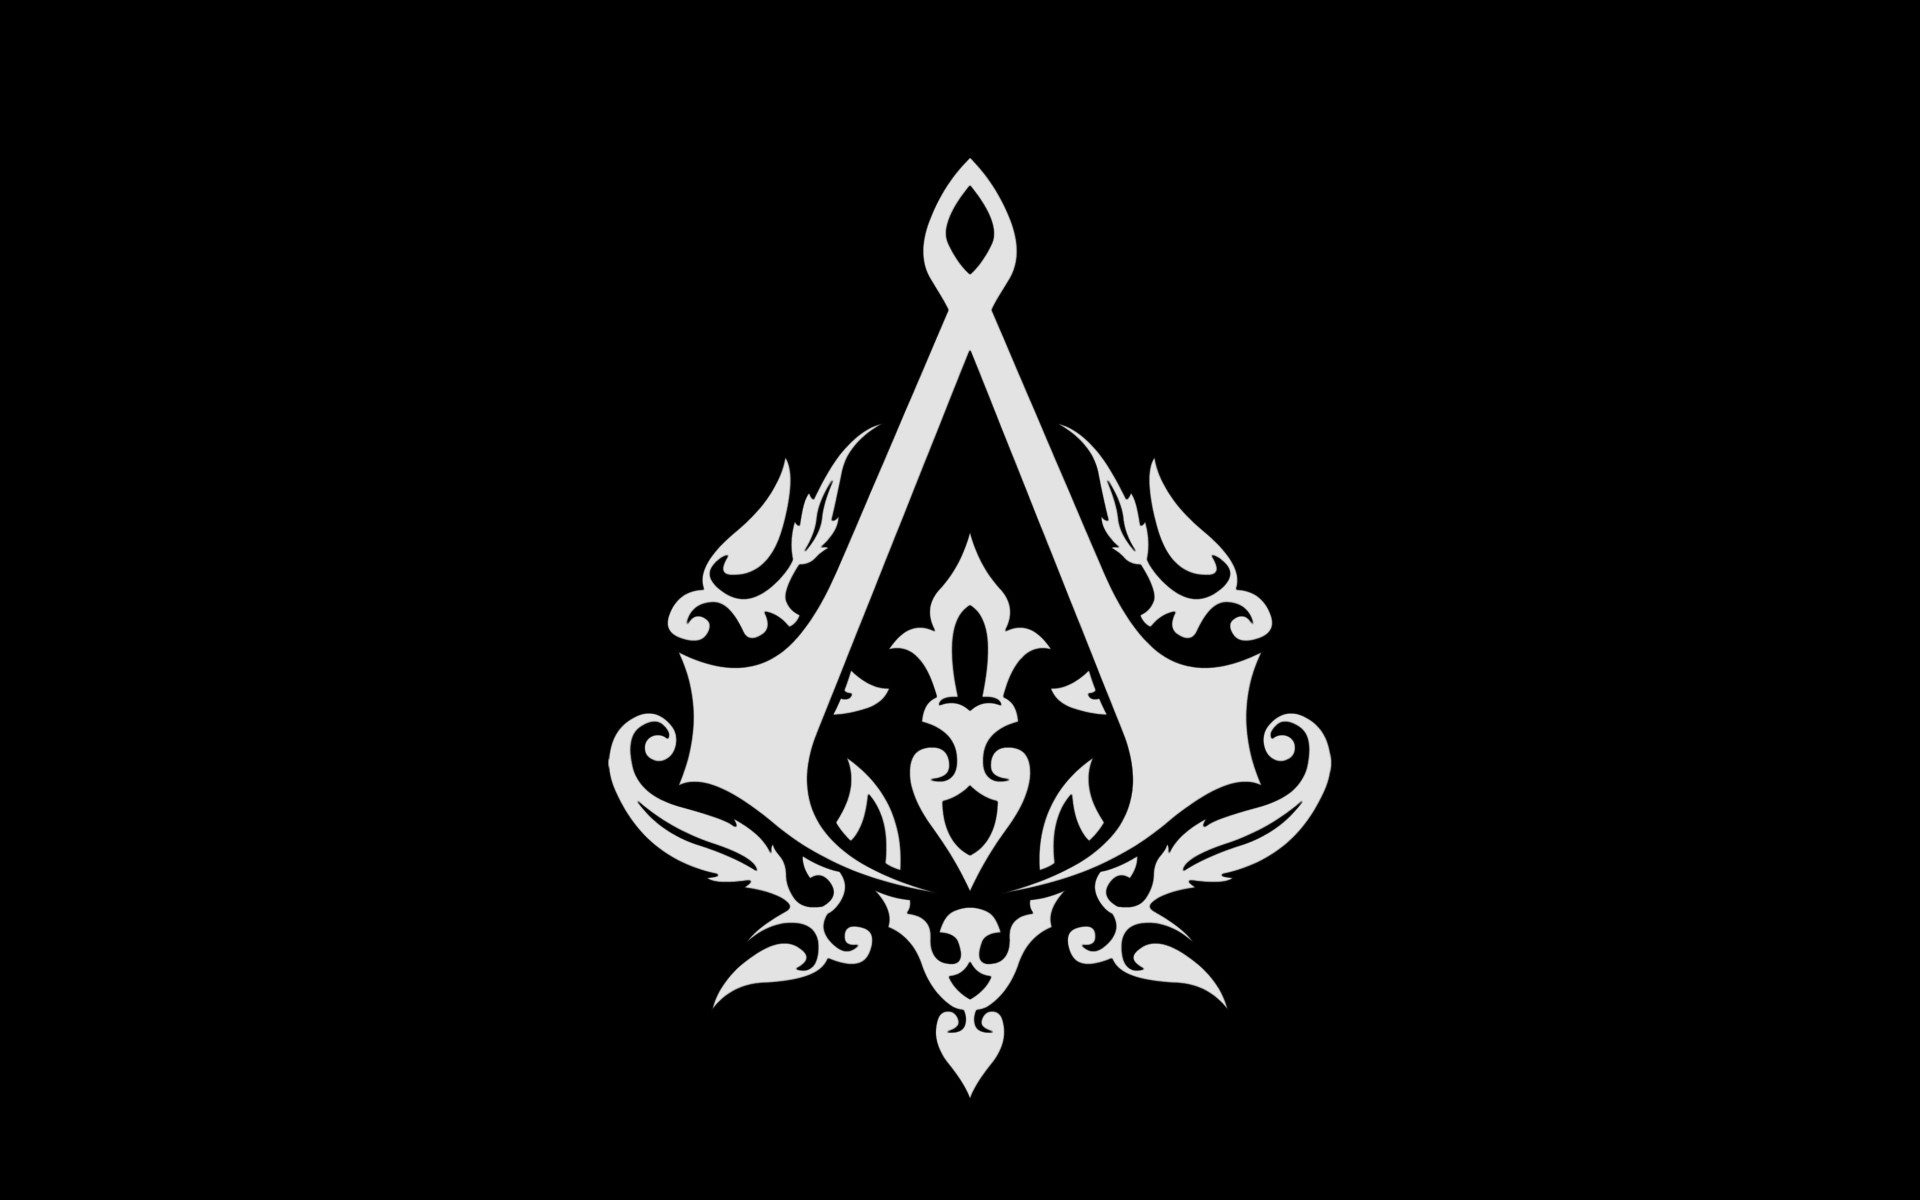 General 1920x1200 Assassin's Creed video games logo black PC gaming simple background minimalism black background